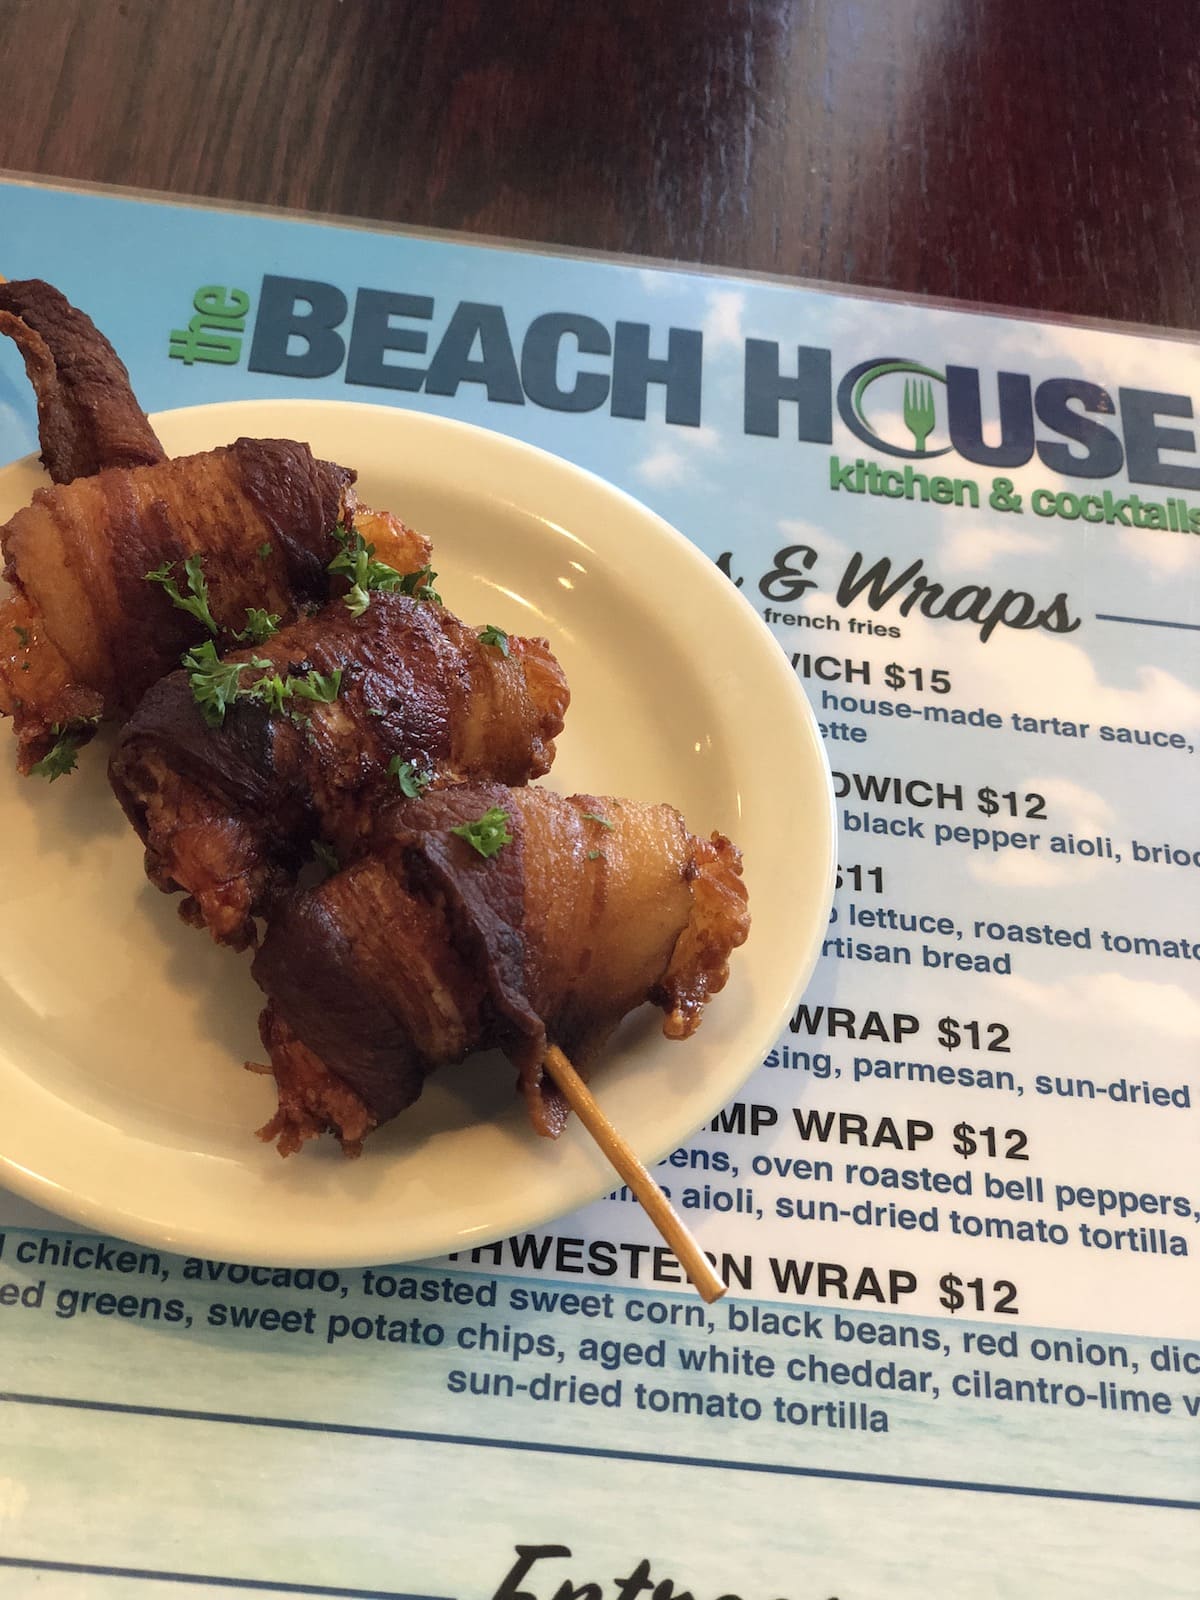 Gulf Shores, Alabama for a Girlfriend Getaway: 5 Reasons to Go - The Beach House Kitchen